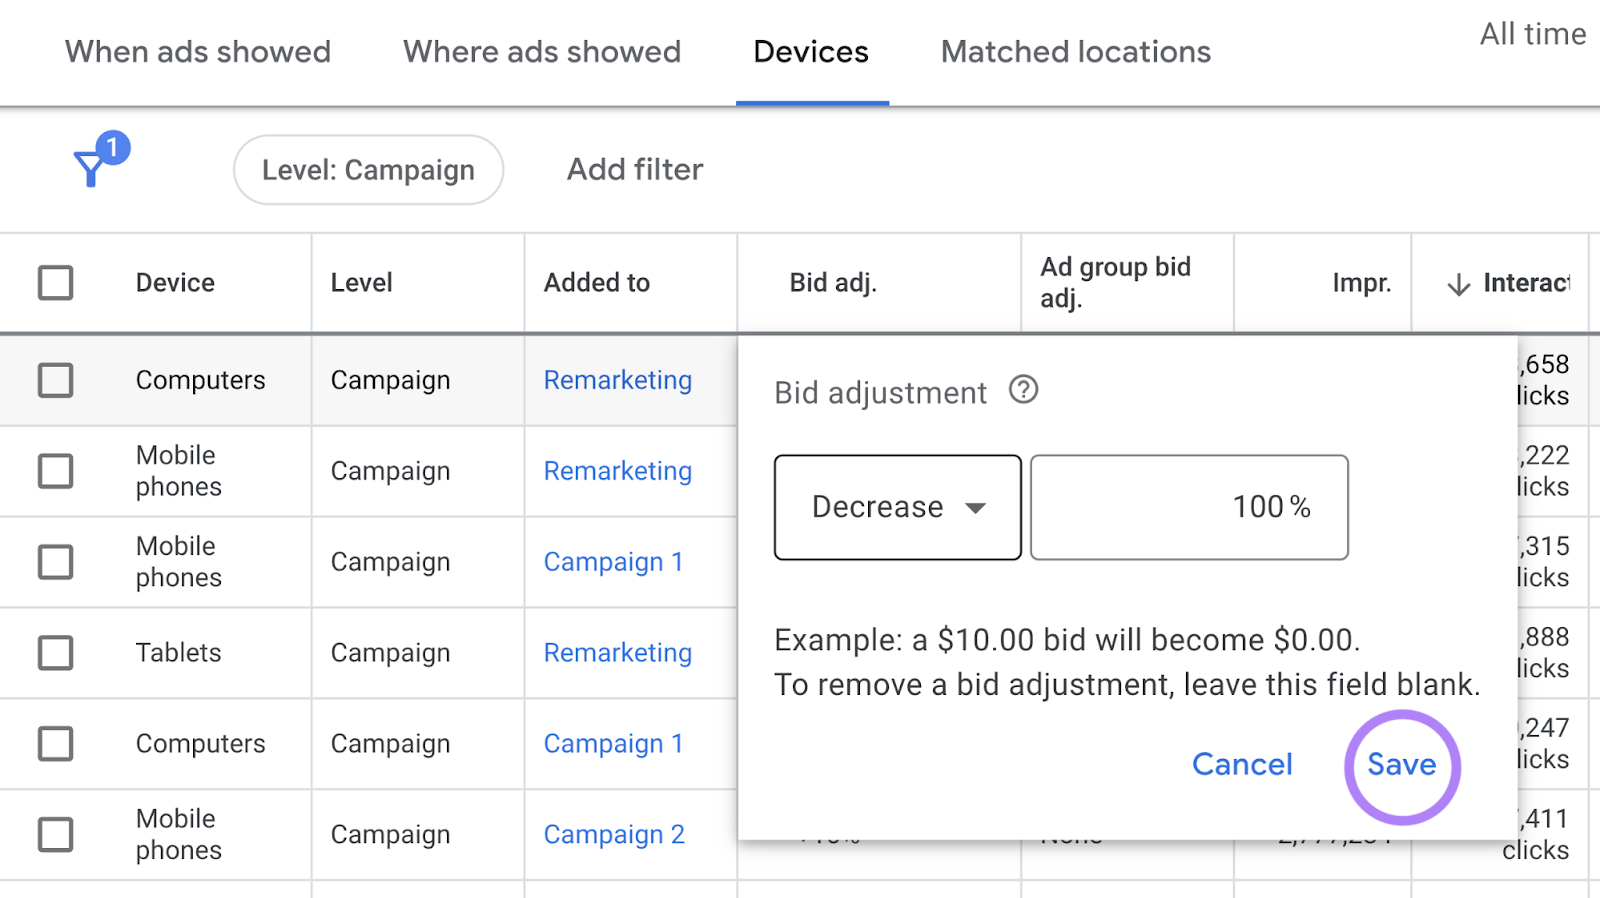 in the “Bid adj.” column in Google Ads you can set your ads to target specific devices